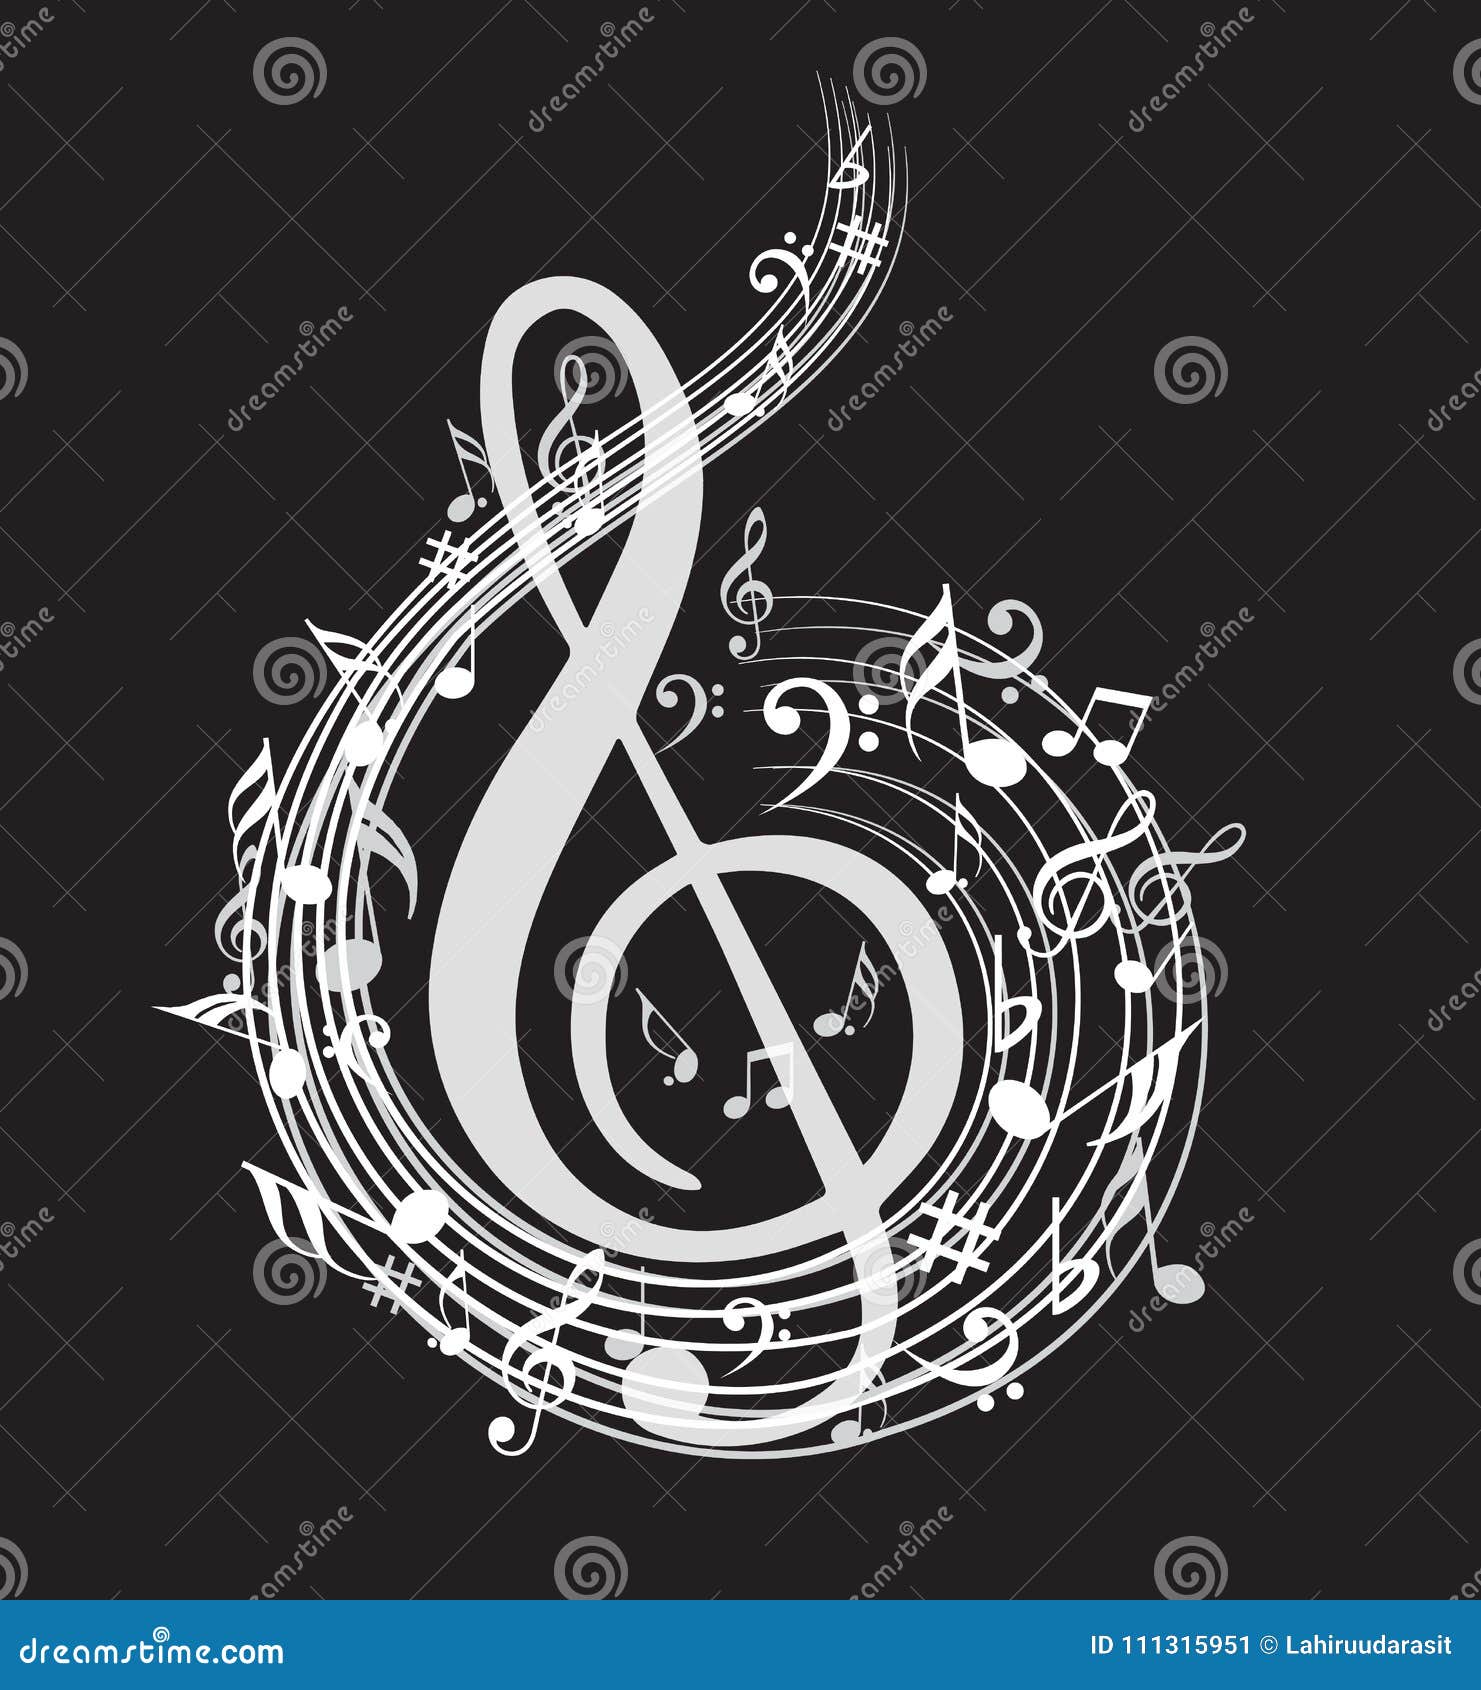 Music Note Background with Symbols Stock Vector - Illustration of black,  drawing: 111315951